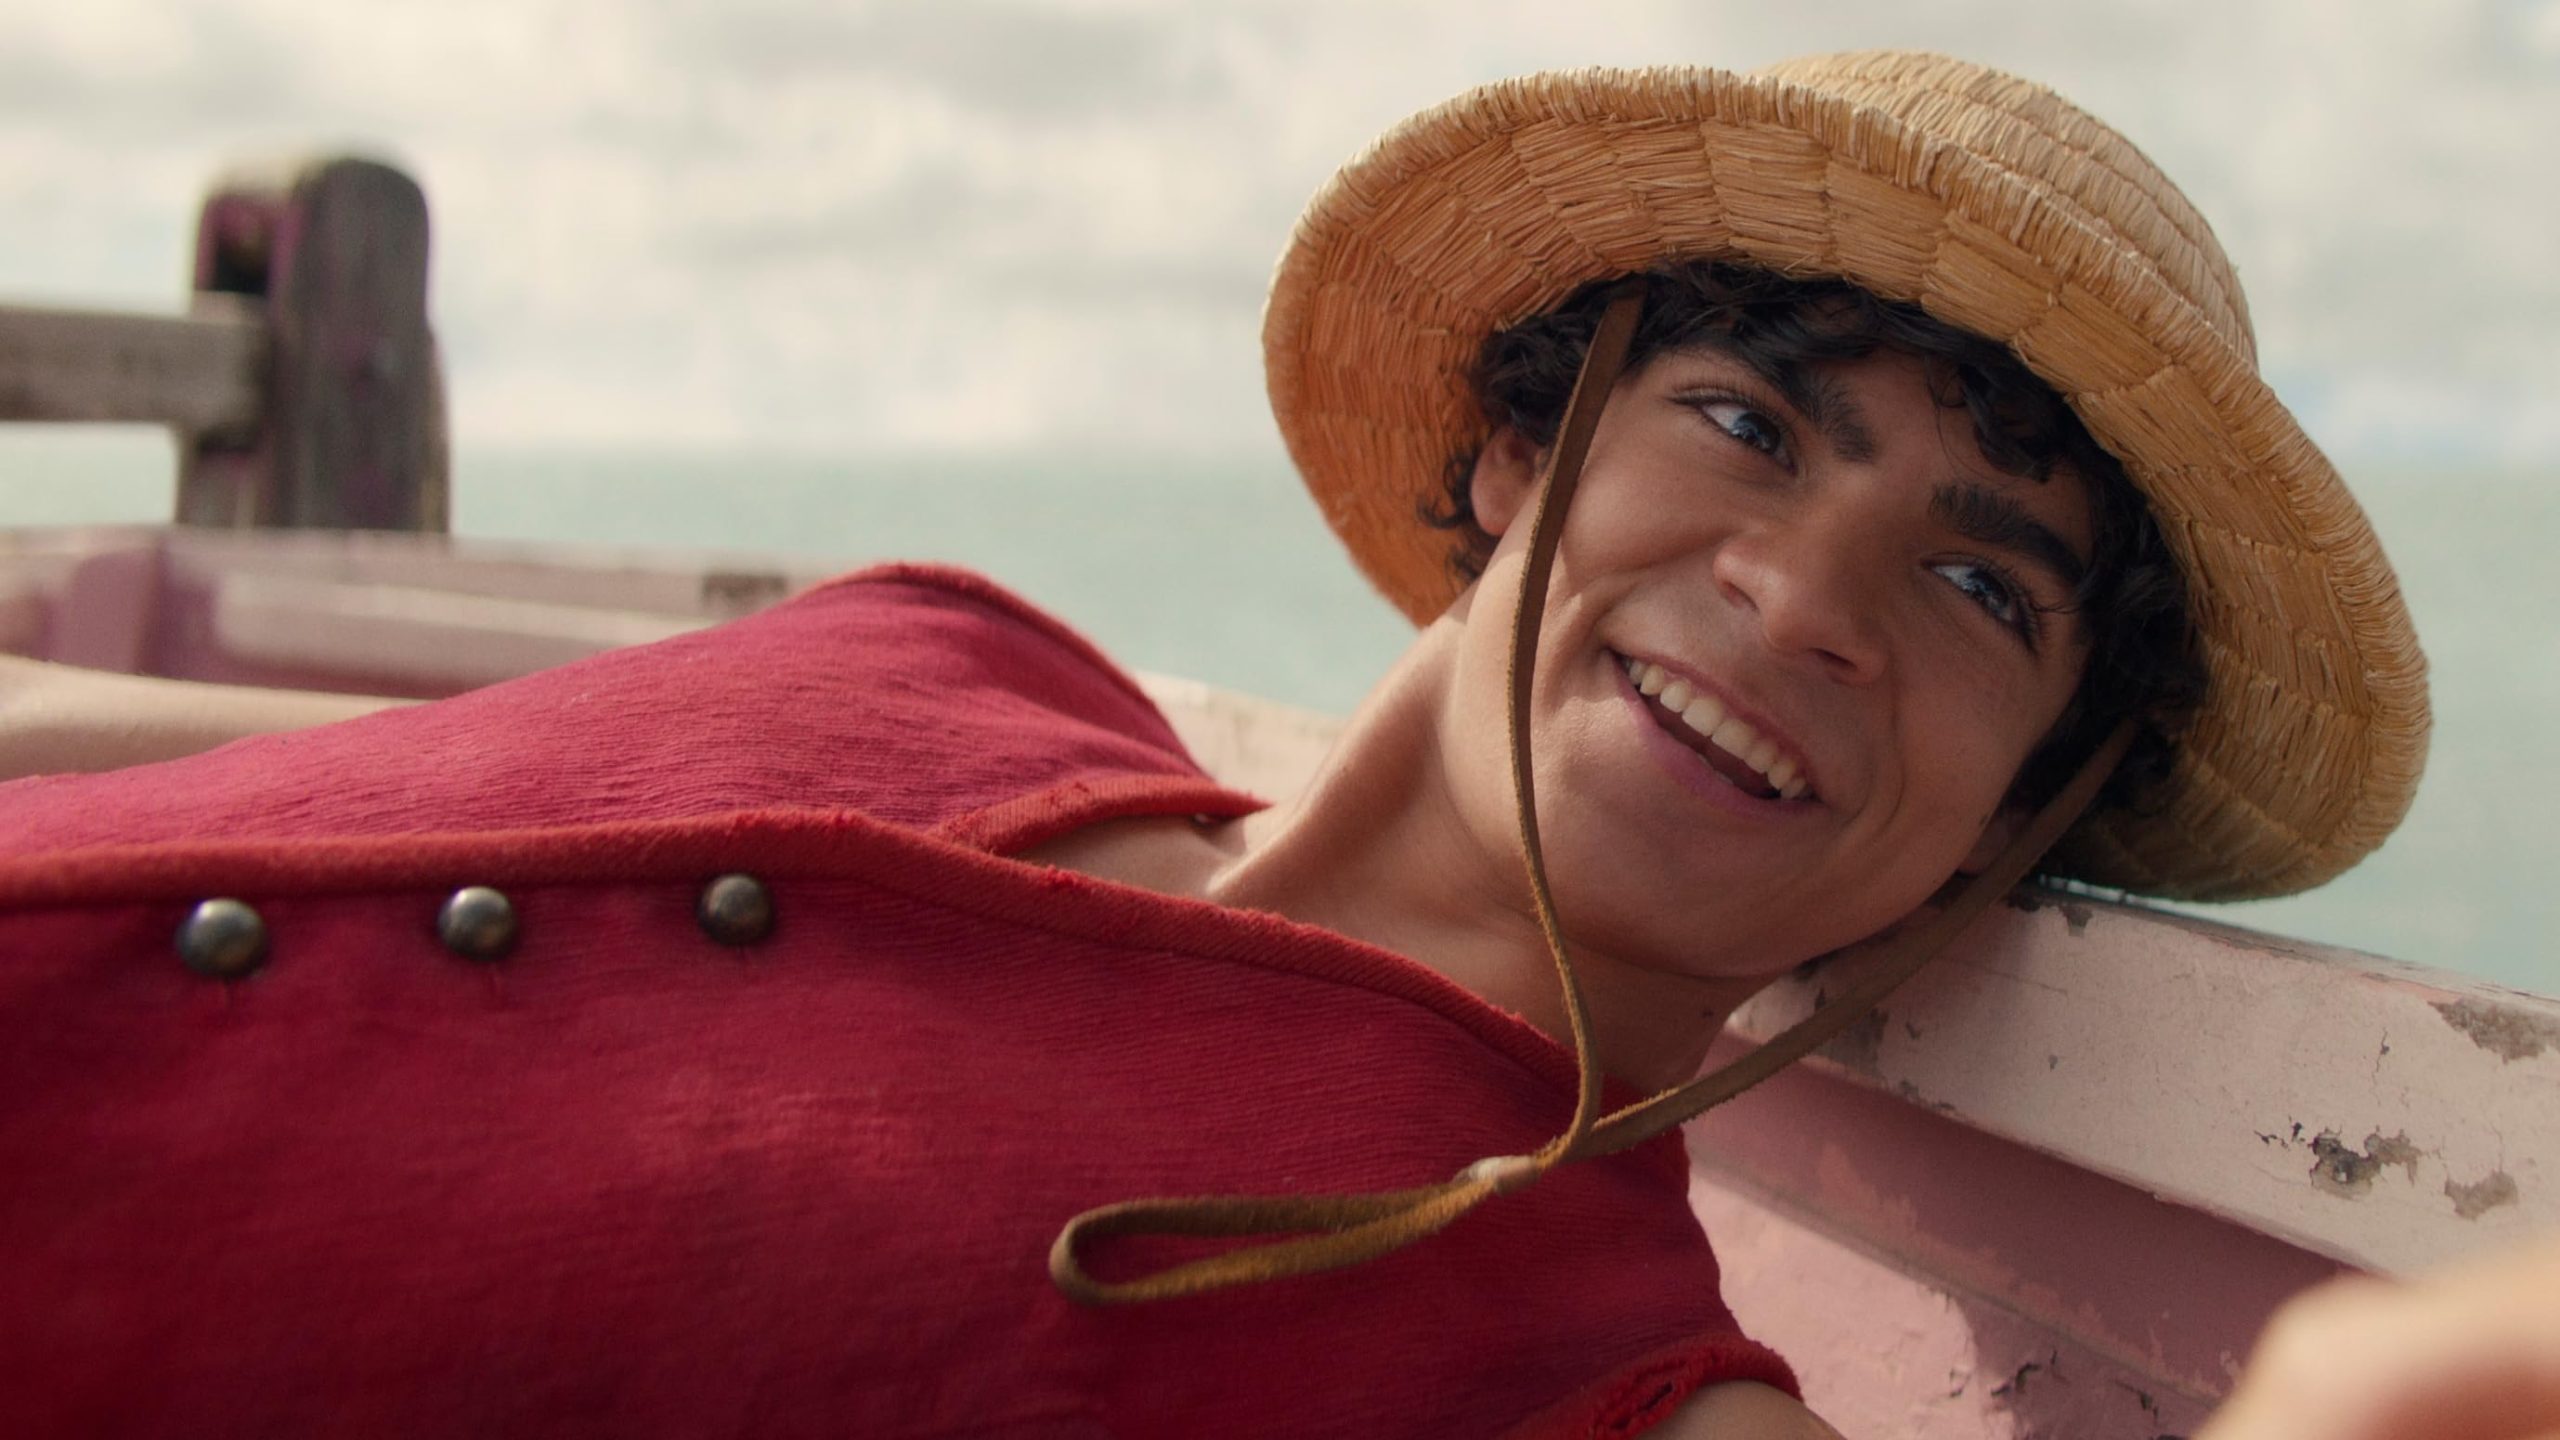 Iñaki Godoy as Monkey D. Luffy in One Piece Live-Action